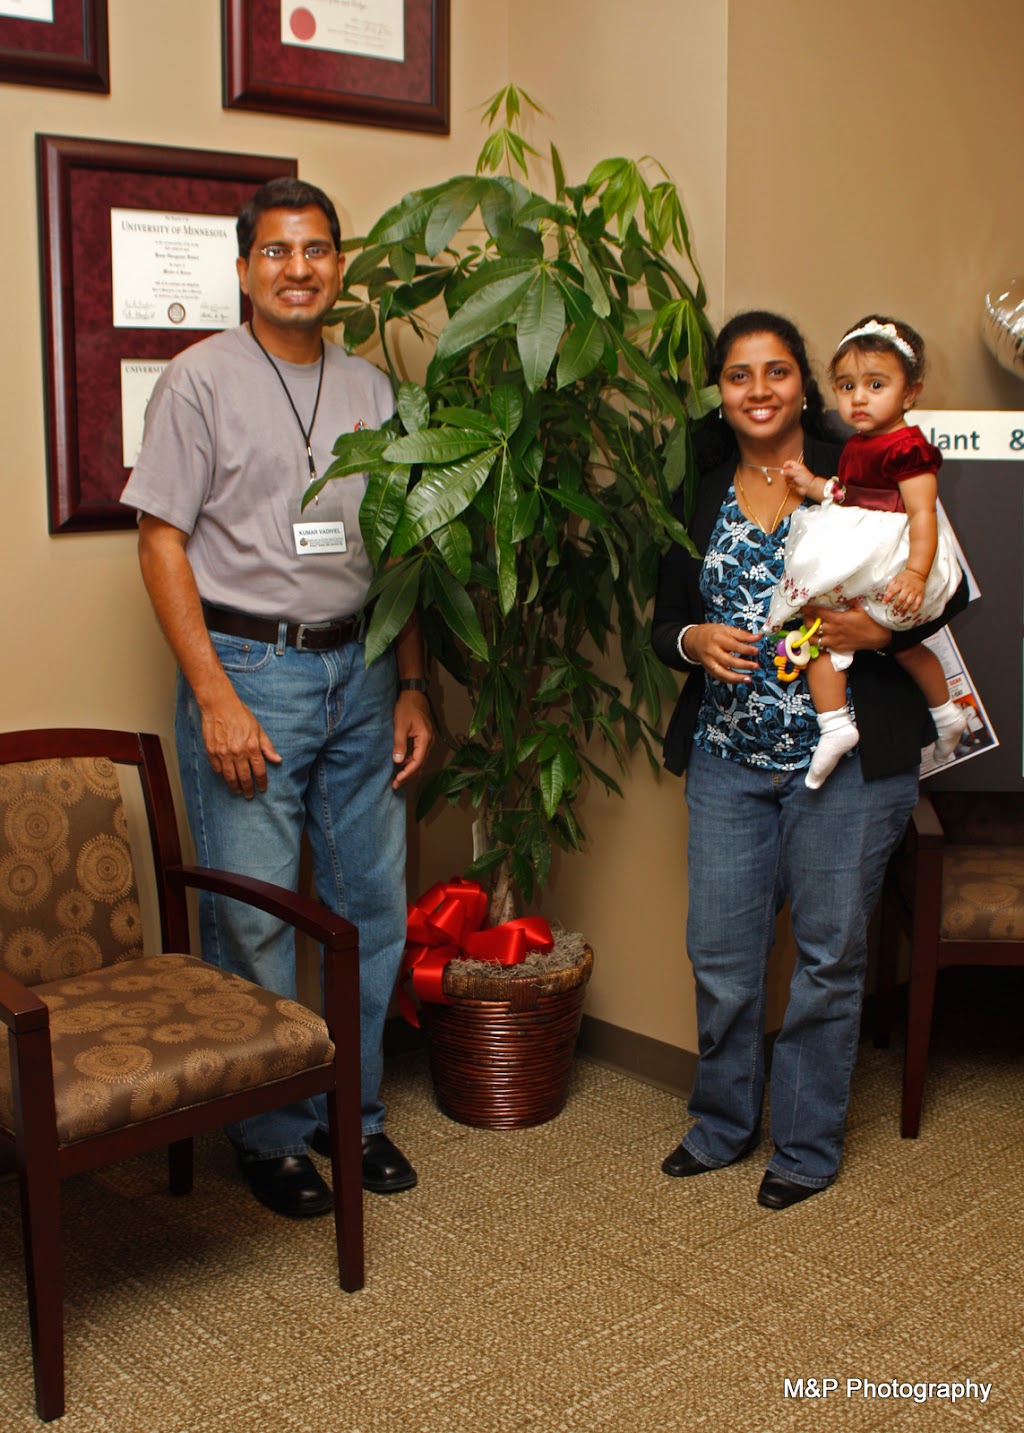 ToothHQ Dental Specialists Grapevine | 3801 William D Tate Ave #100, Grapevine, TX 76051, USA | Phone: (817) 500-4587